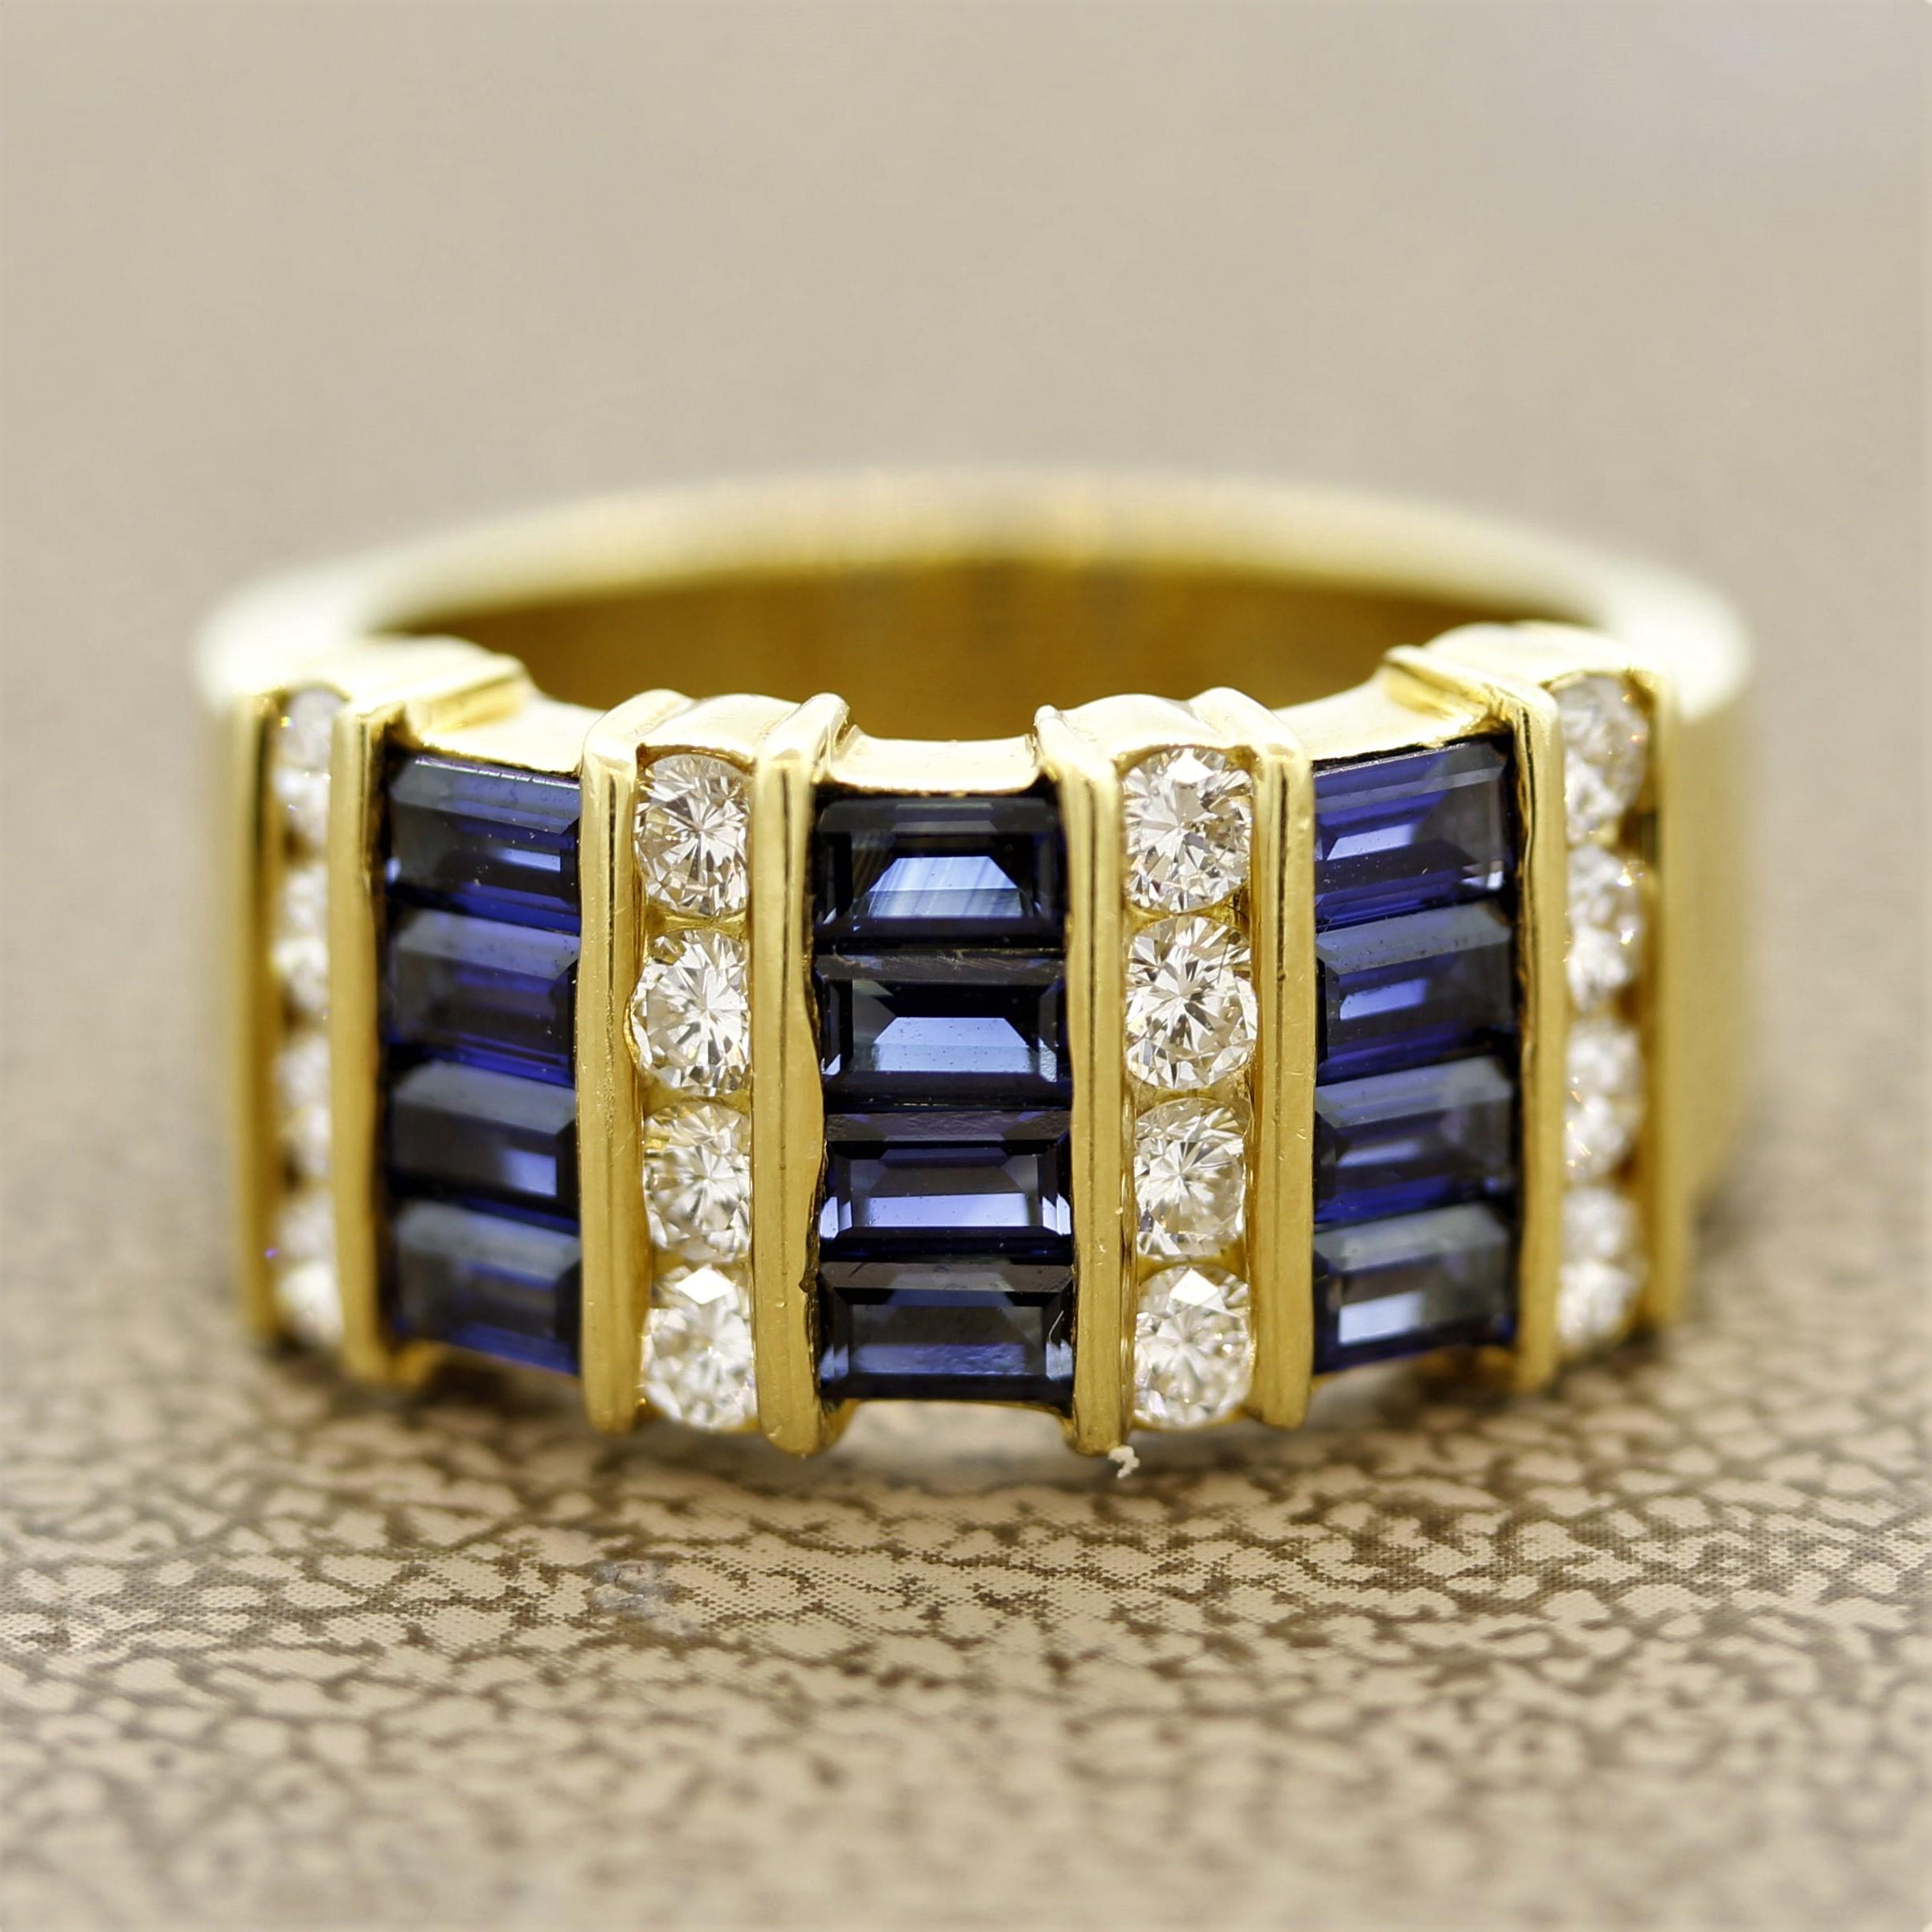 A classic Gemlok wide band featuring 1.69 carats of baguette cut sapphires along with 0.70 carats of round brilliant cut diamonds. The sapphires are channel set in rows of 4 and separated by the diamonds. Made in 18k yellow gold, a wide and